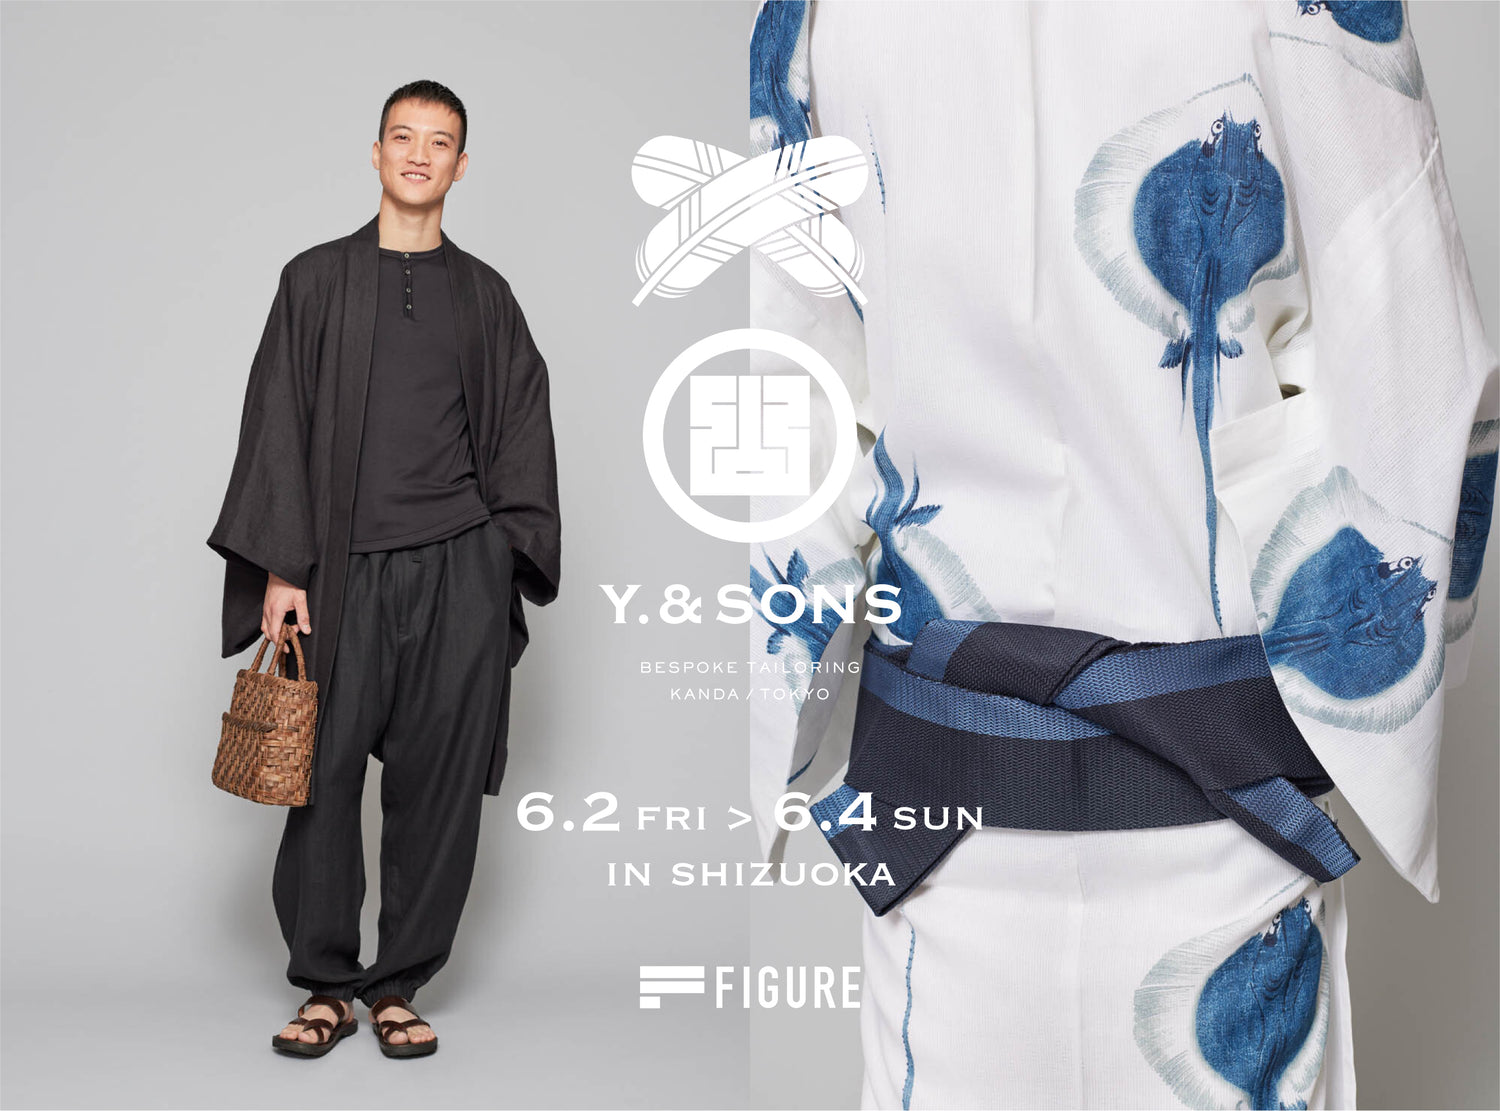 Y. & SONS POP UP STORE  at FIGURE SHIZUOKA